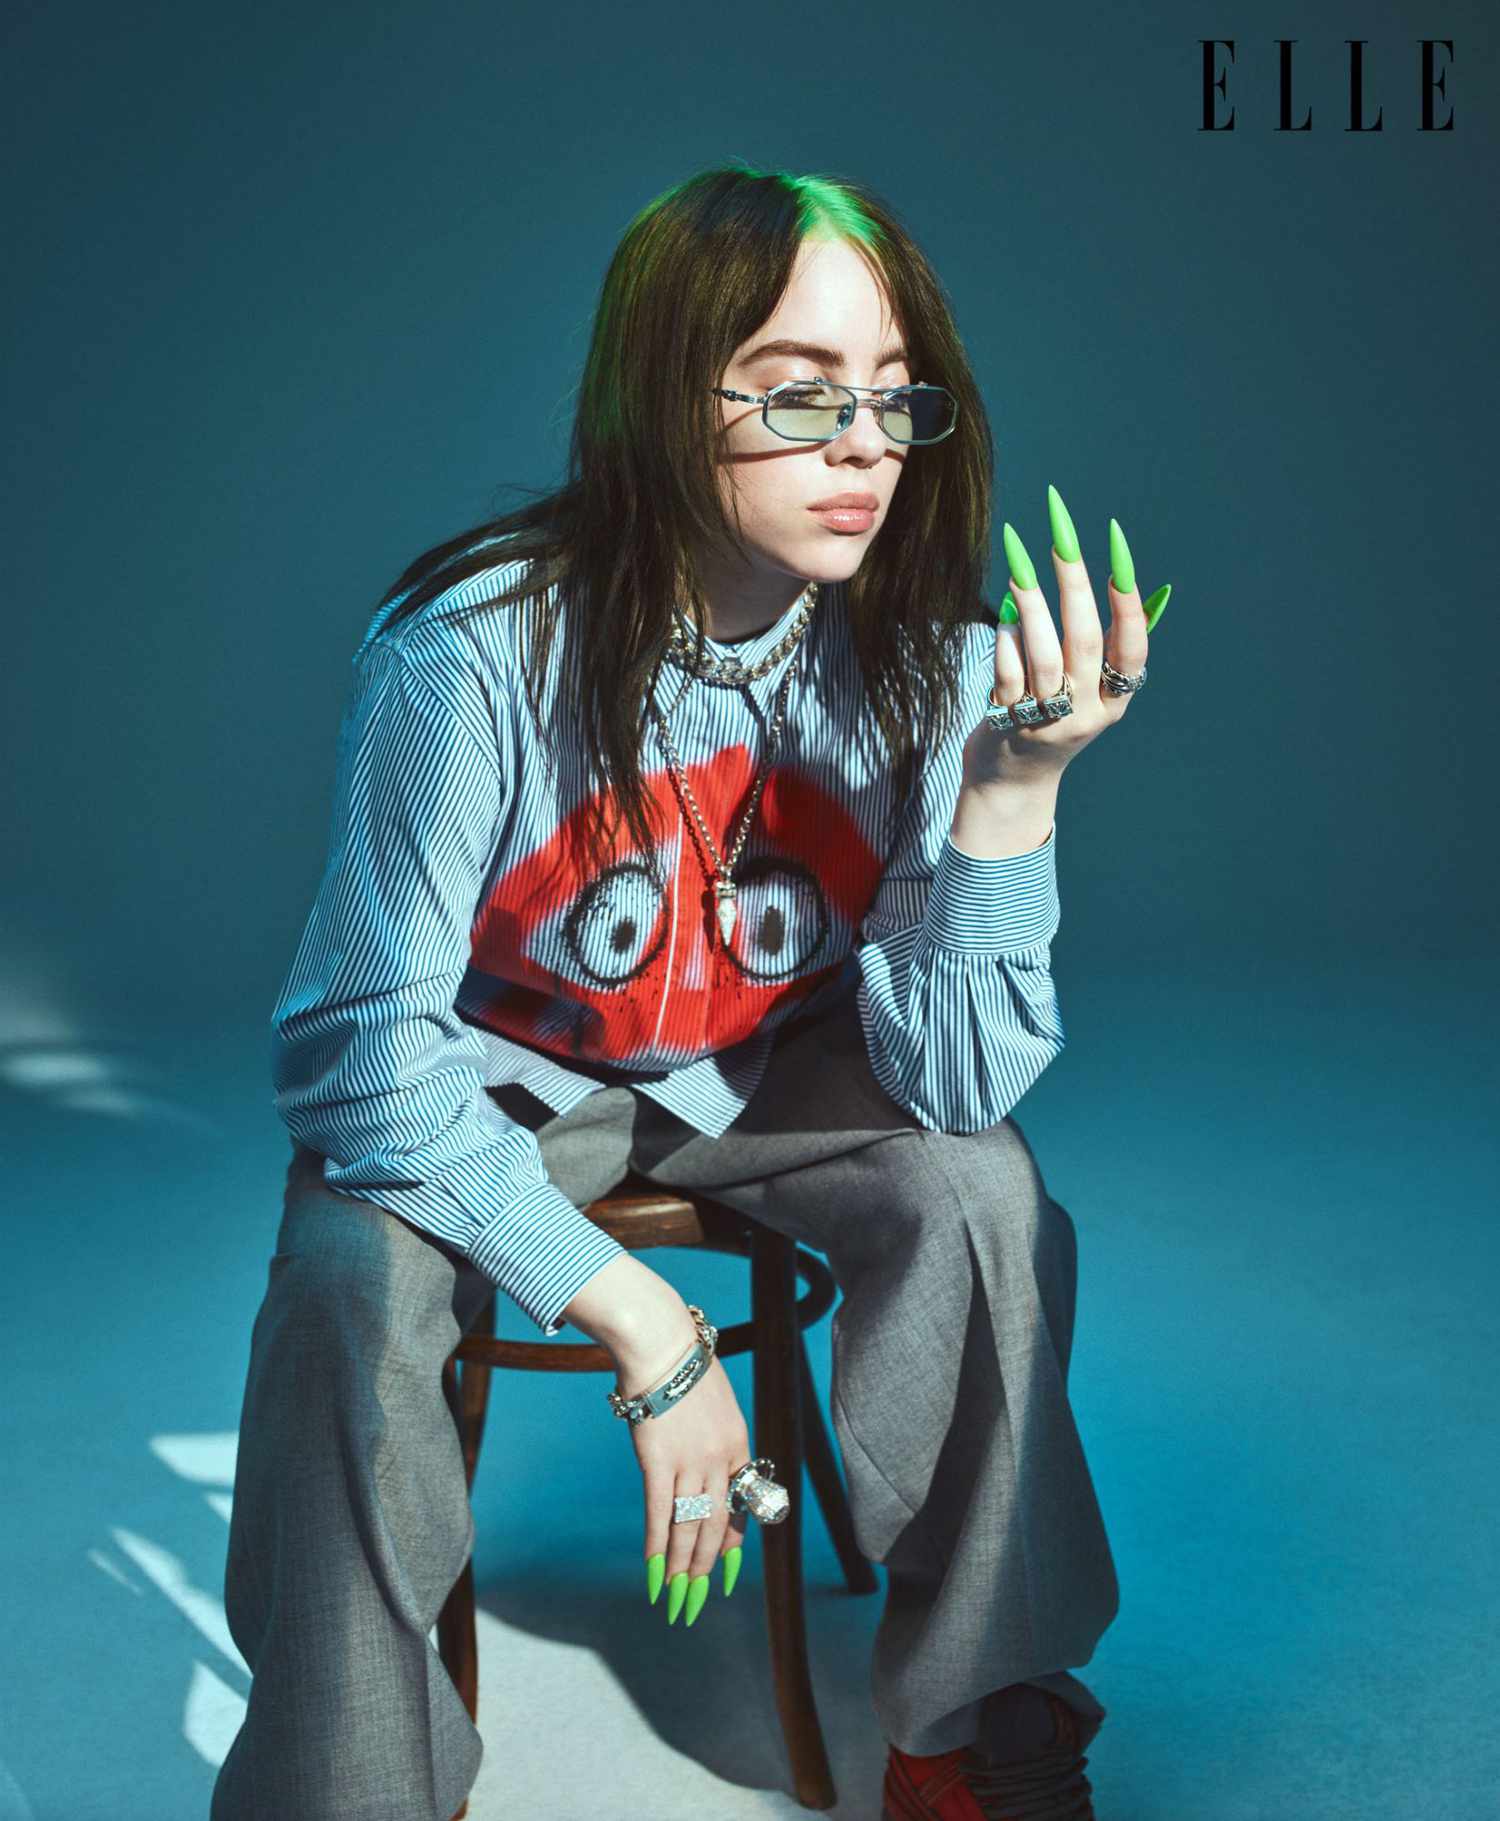 Billie Eilish On Why She Covers Her Chest And Why She Might Not